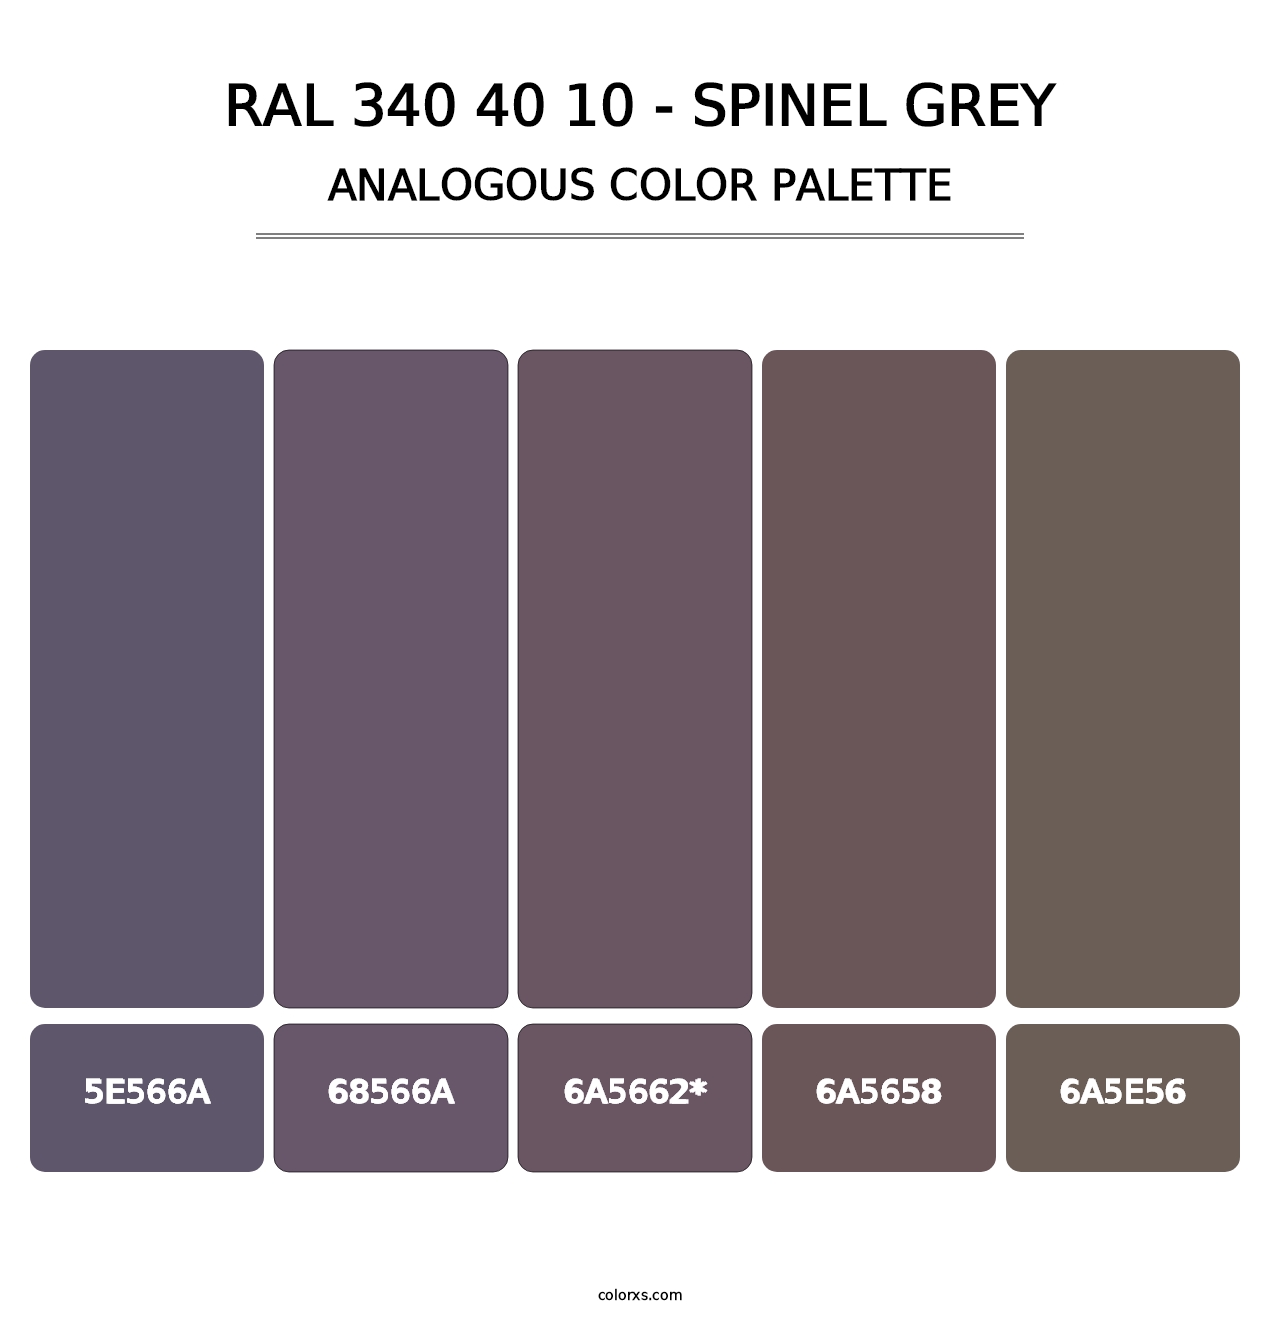 RAL 340 40 10 - Spinel Grey - Analogous Color Palette